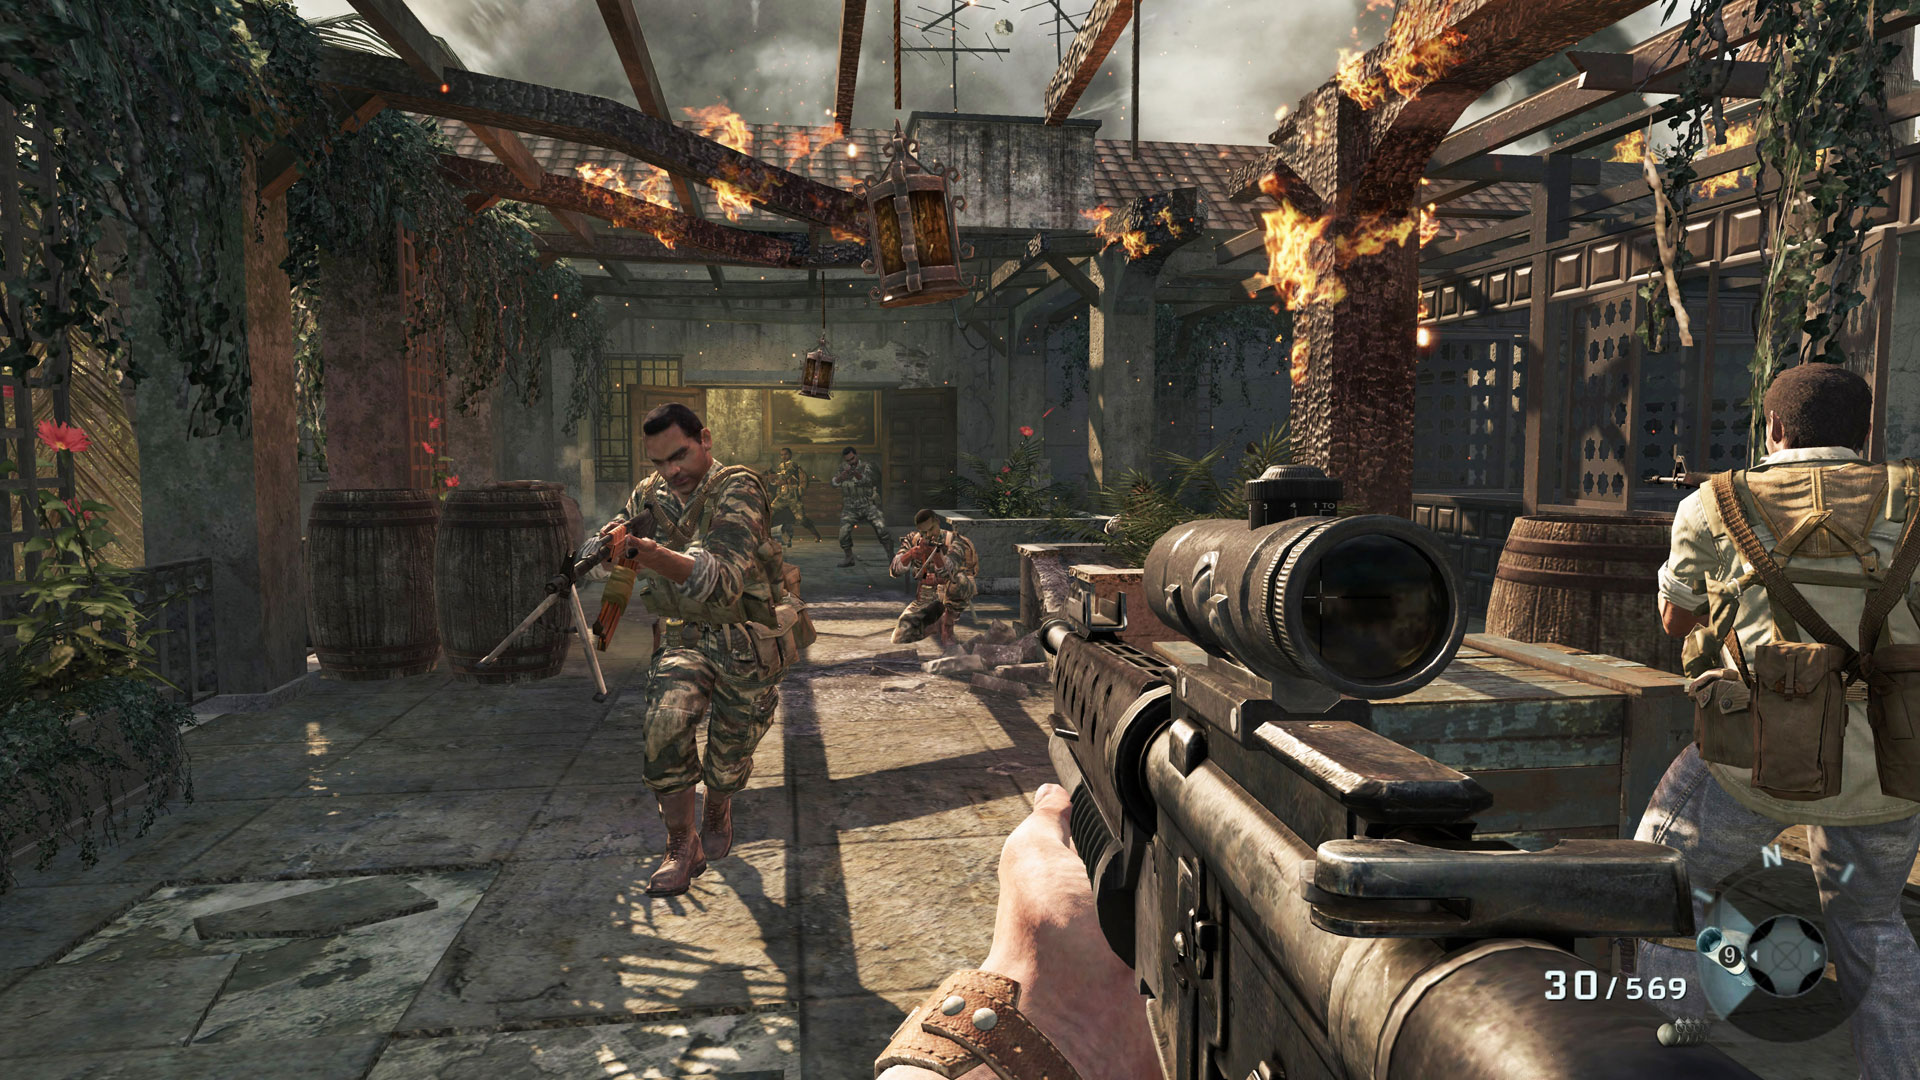 download game call of duty free